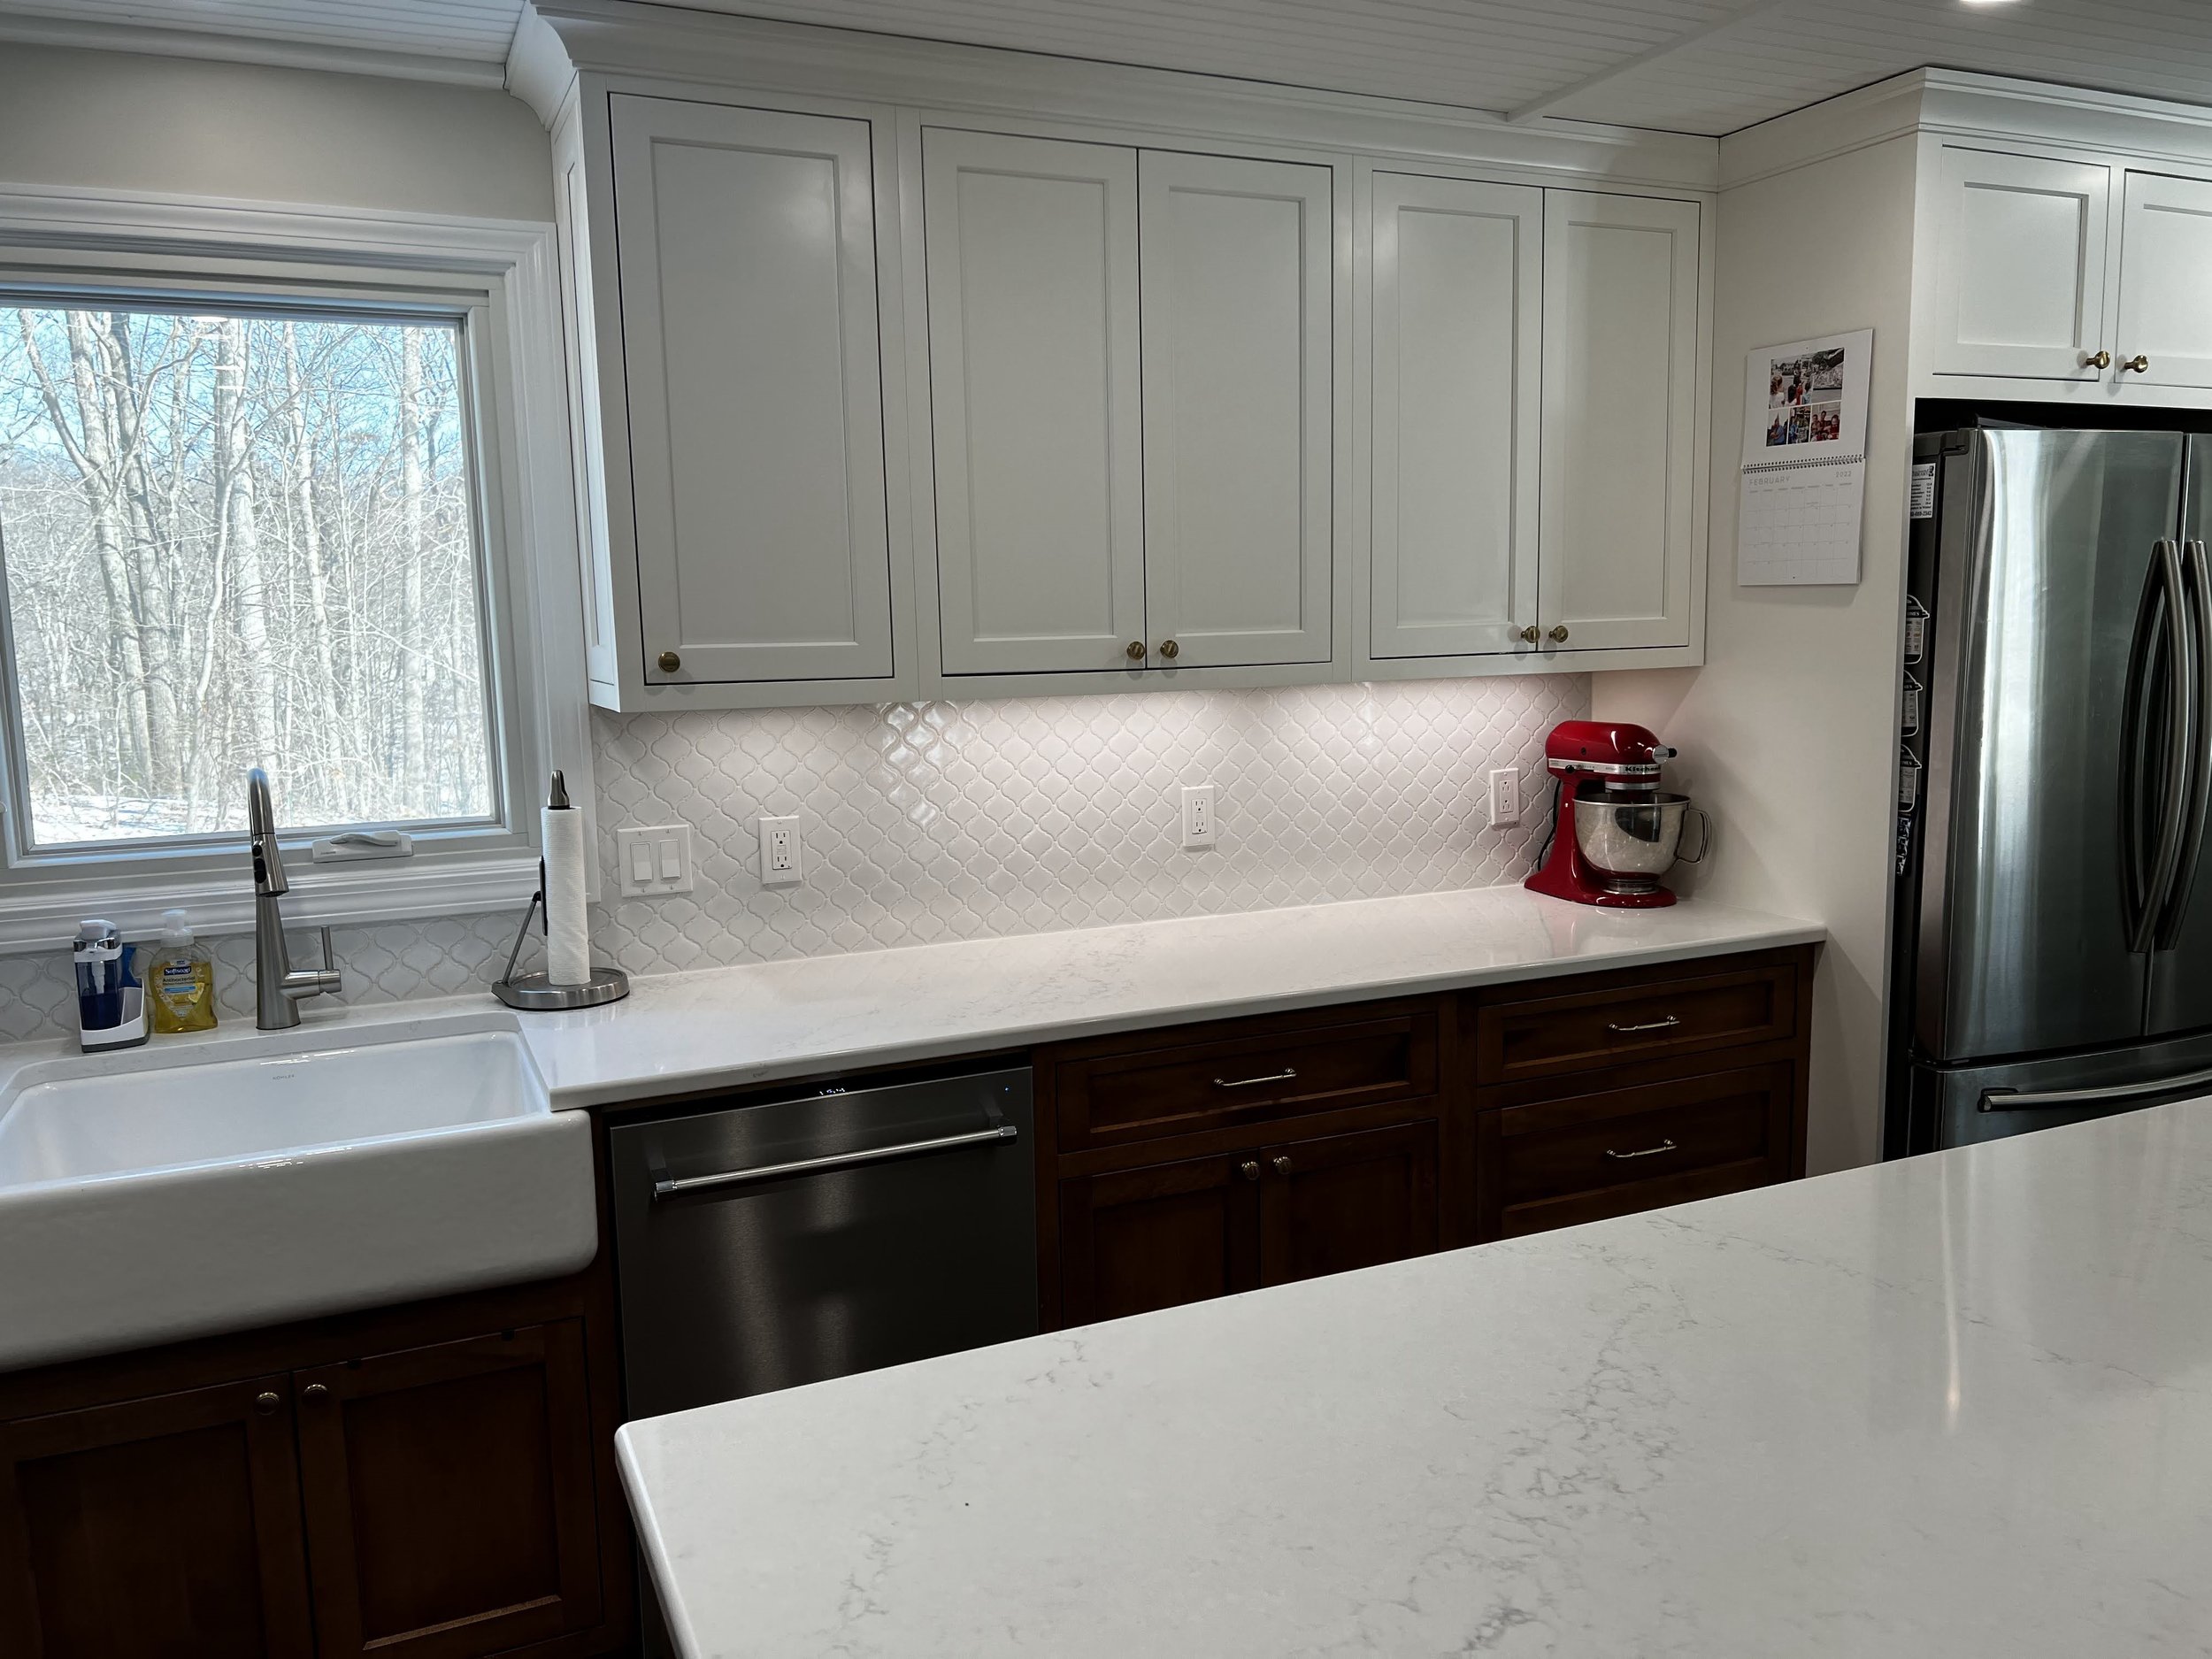 Shaw Remodeling - kitchen design renovations in Niantic East Lyme Old Lyme CT before and after photos makeover (7).jpg